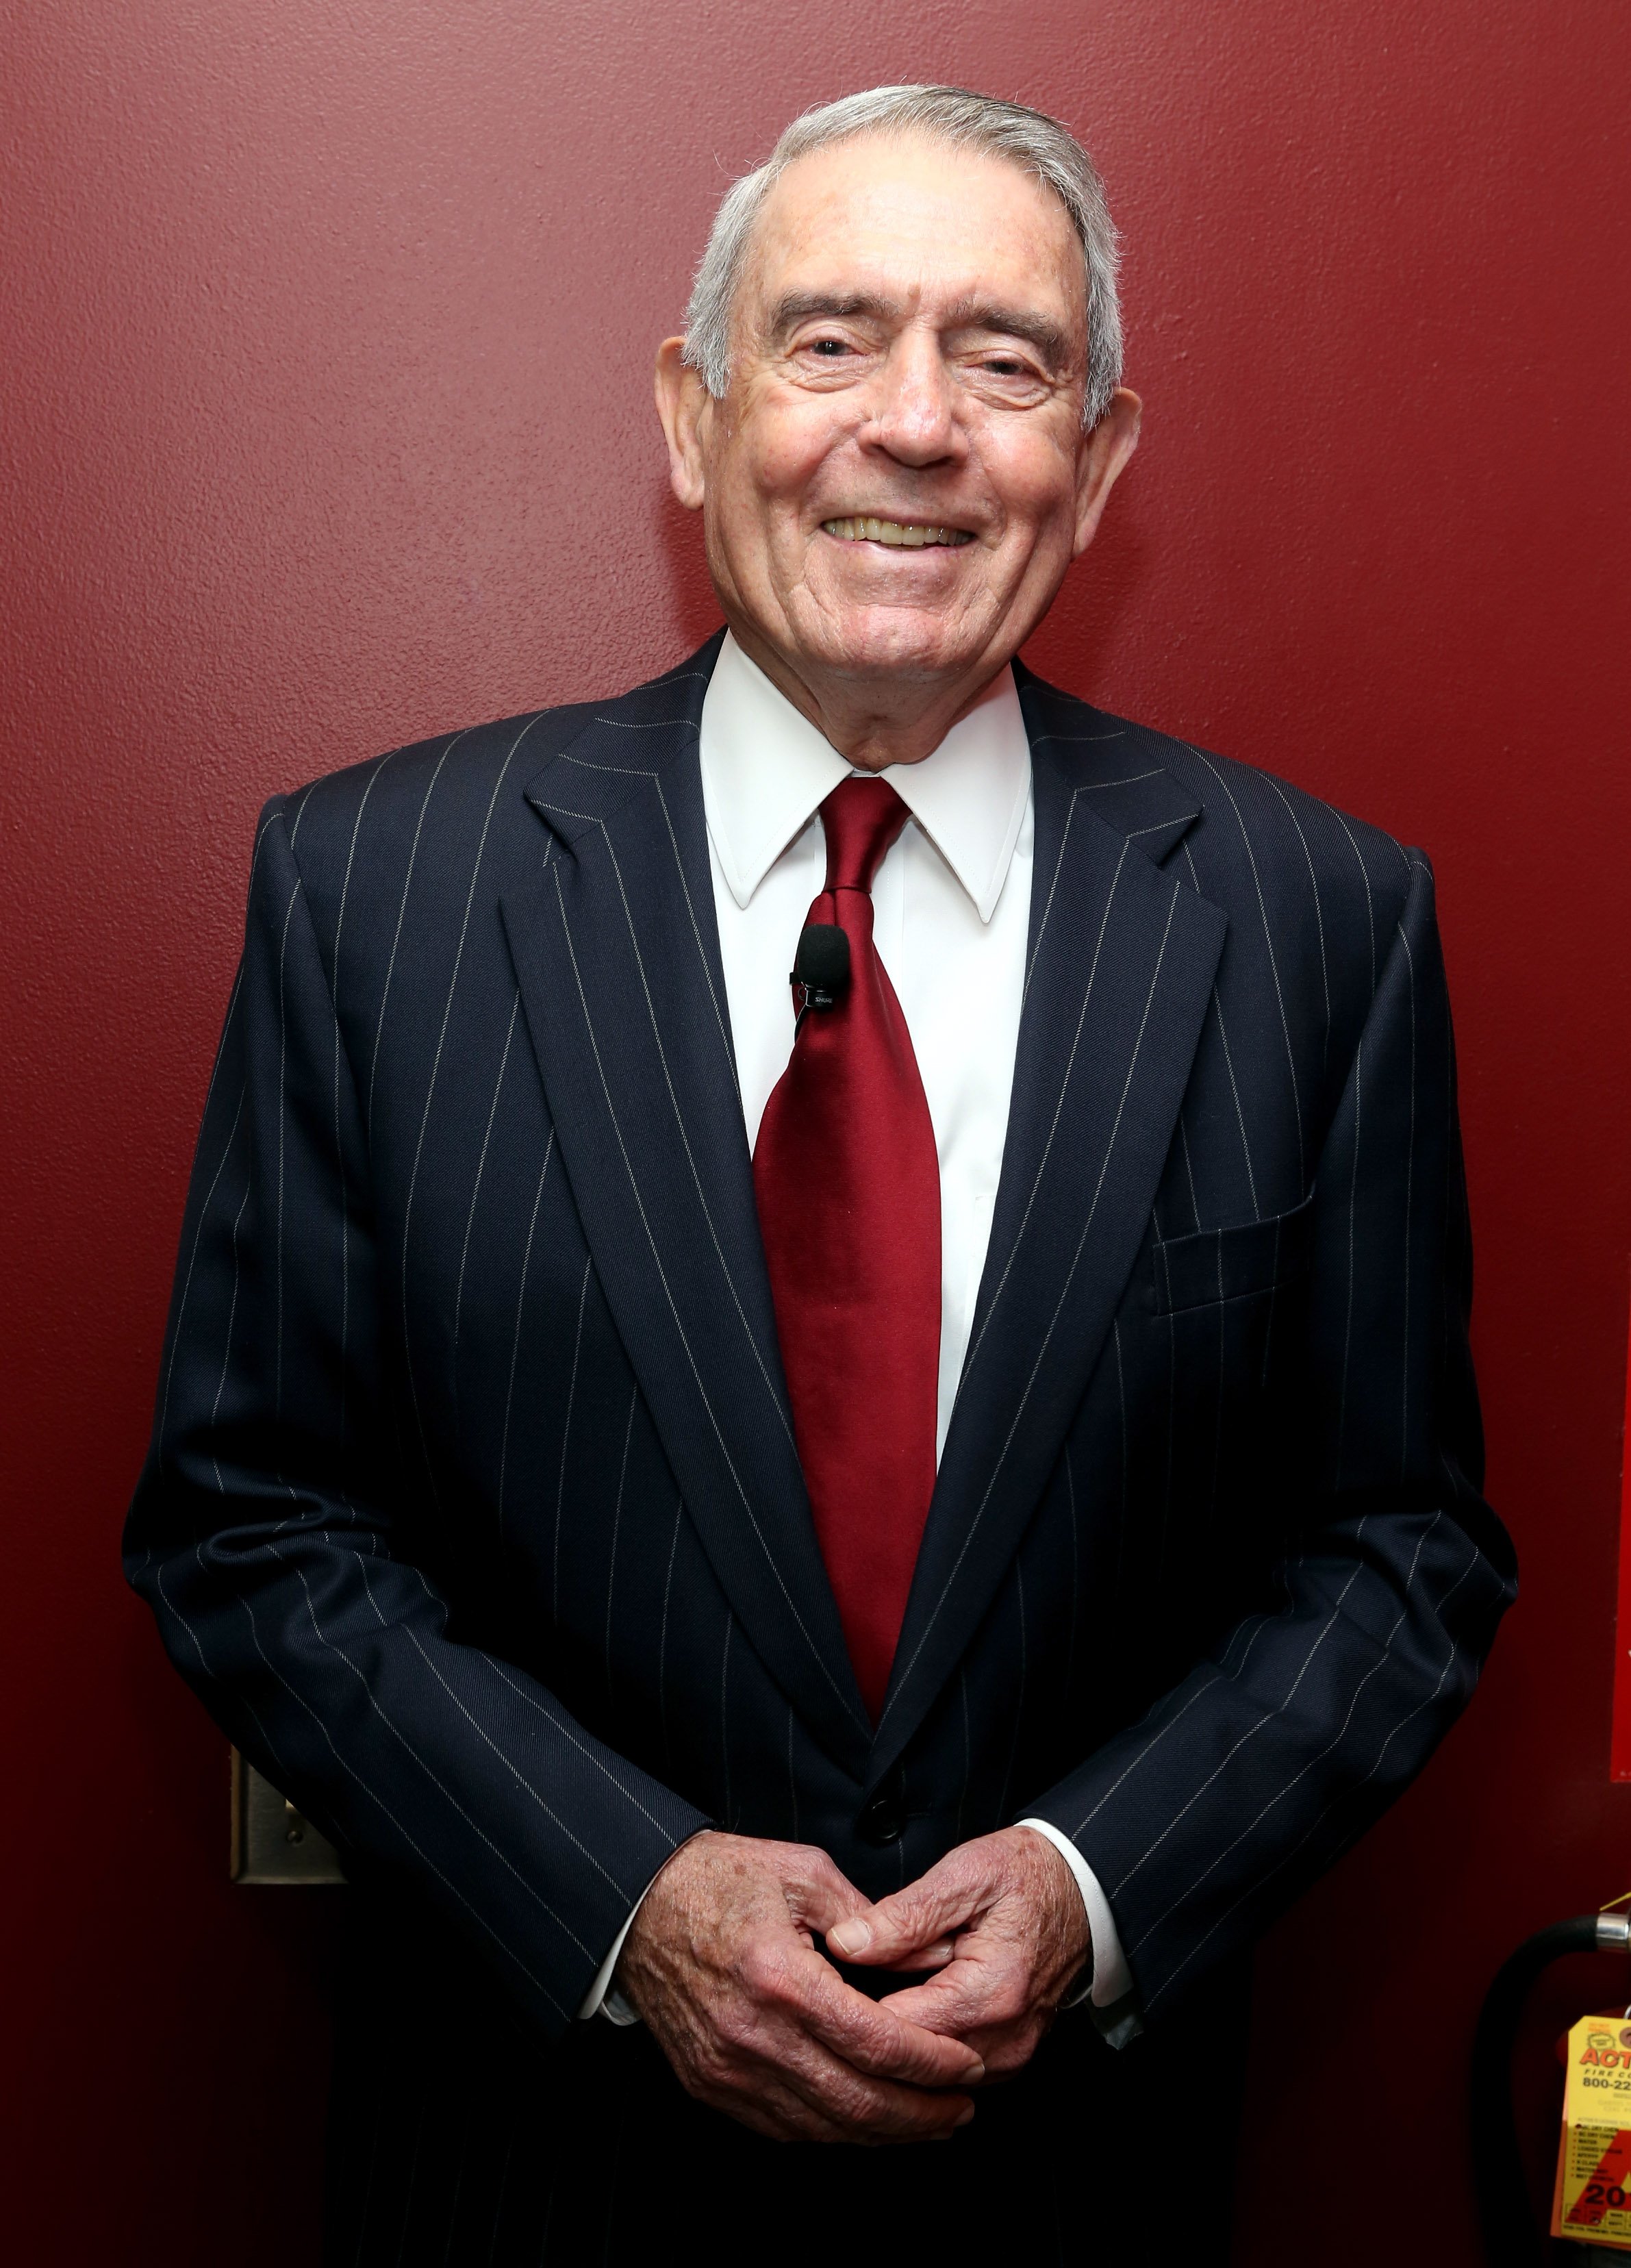 Dan Rather poses for The Newsmen: Changing Dynamics of Media, Tech, and Journalism panel on September 30, 2014 in New York City. Source: Getty Images 